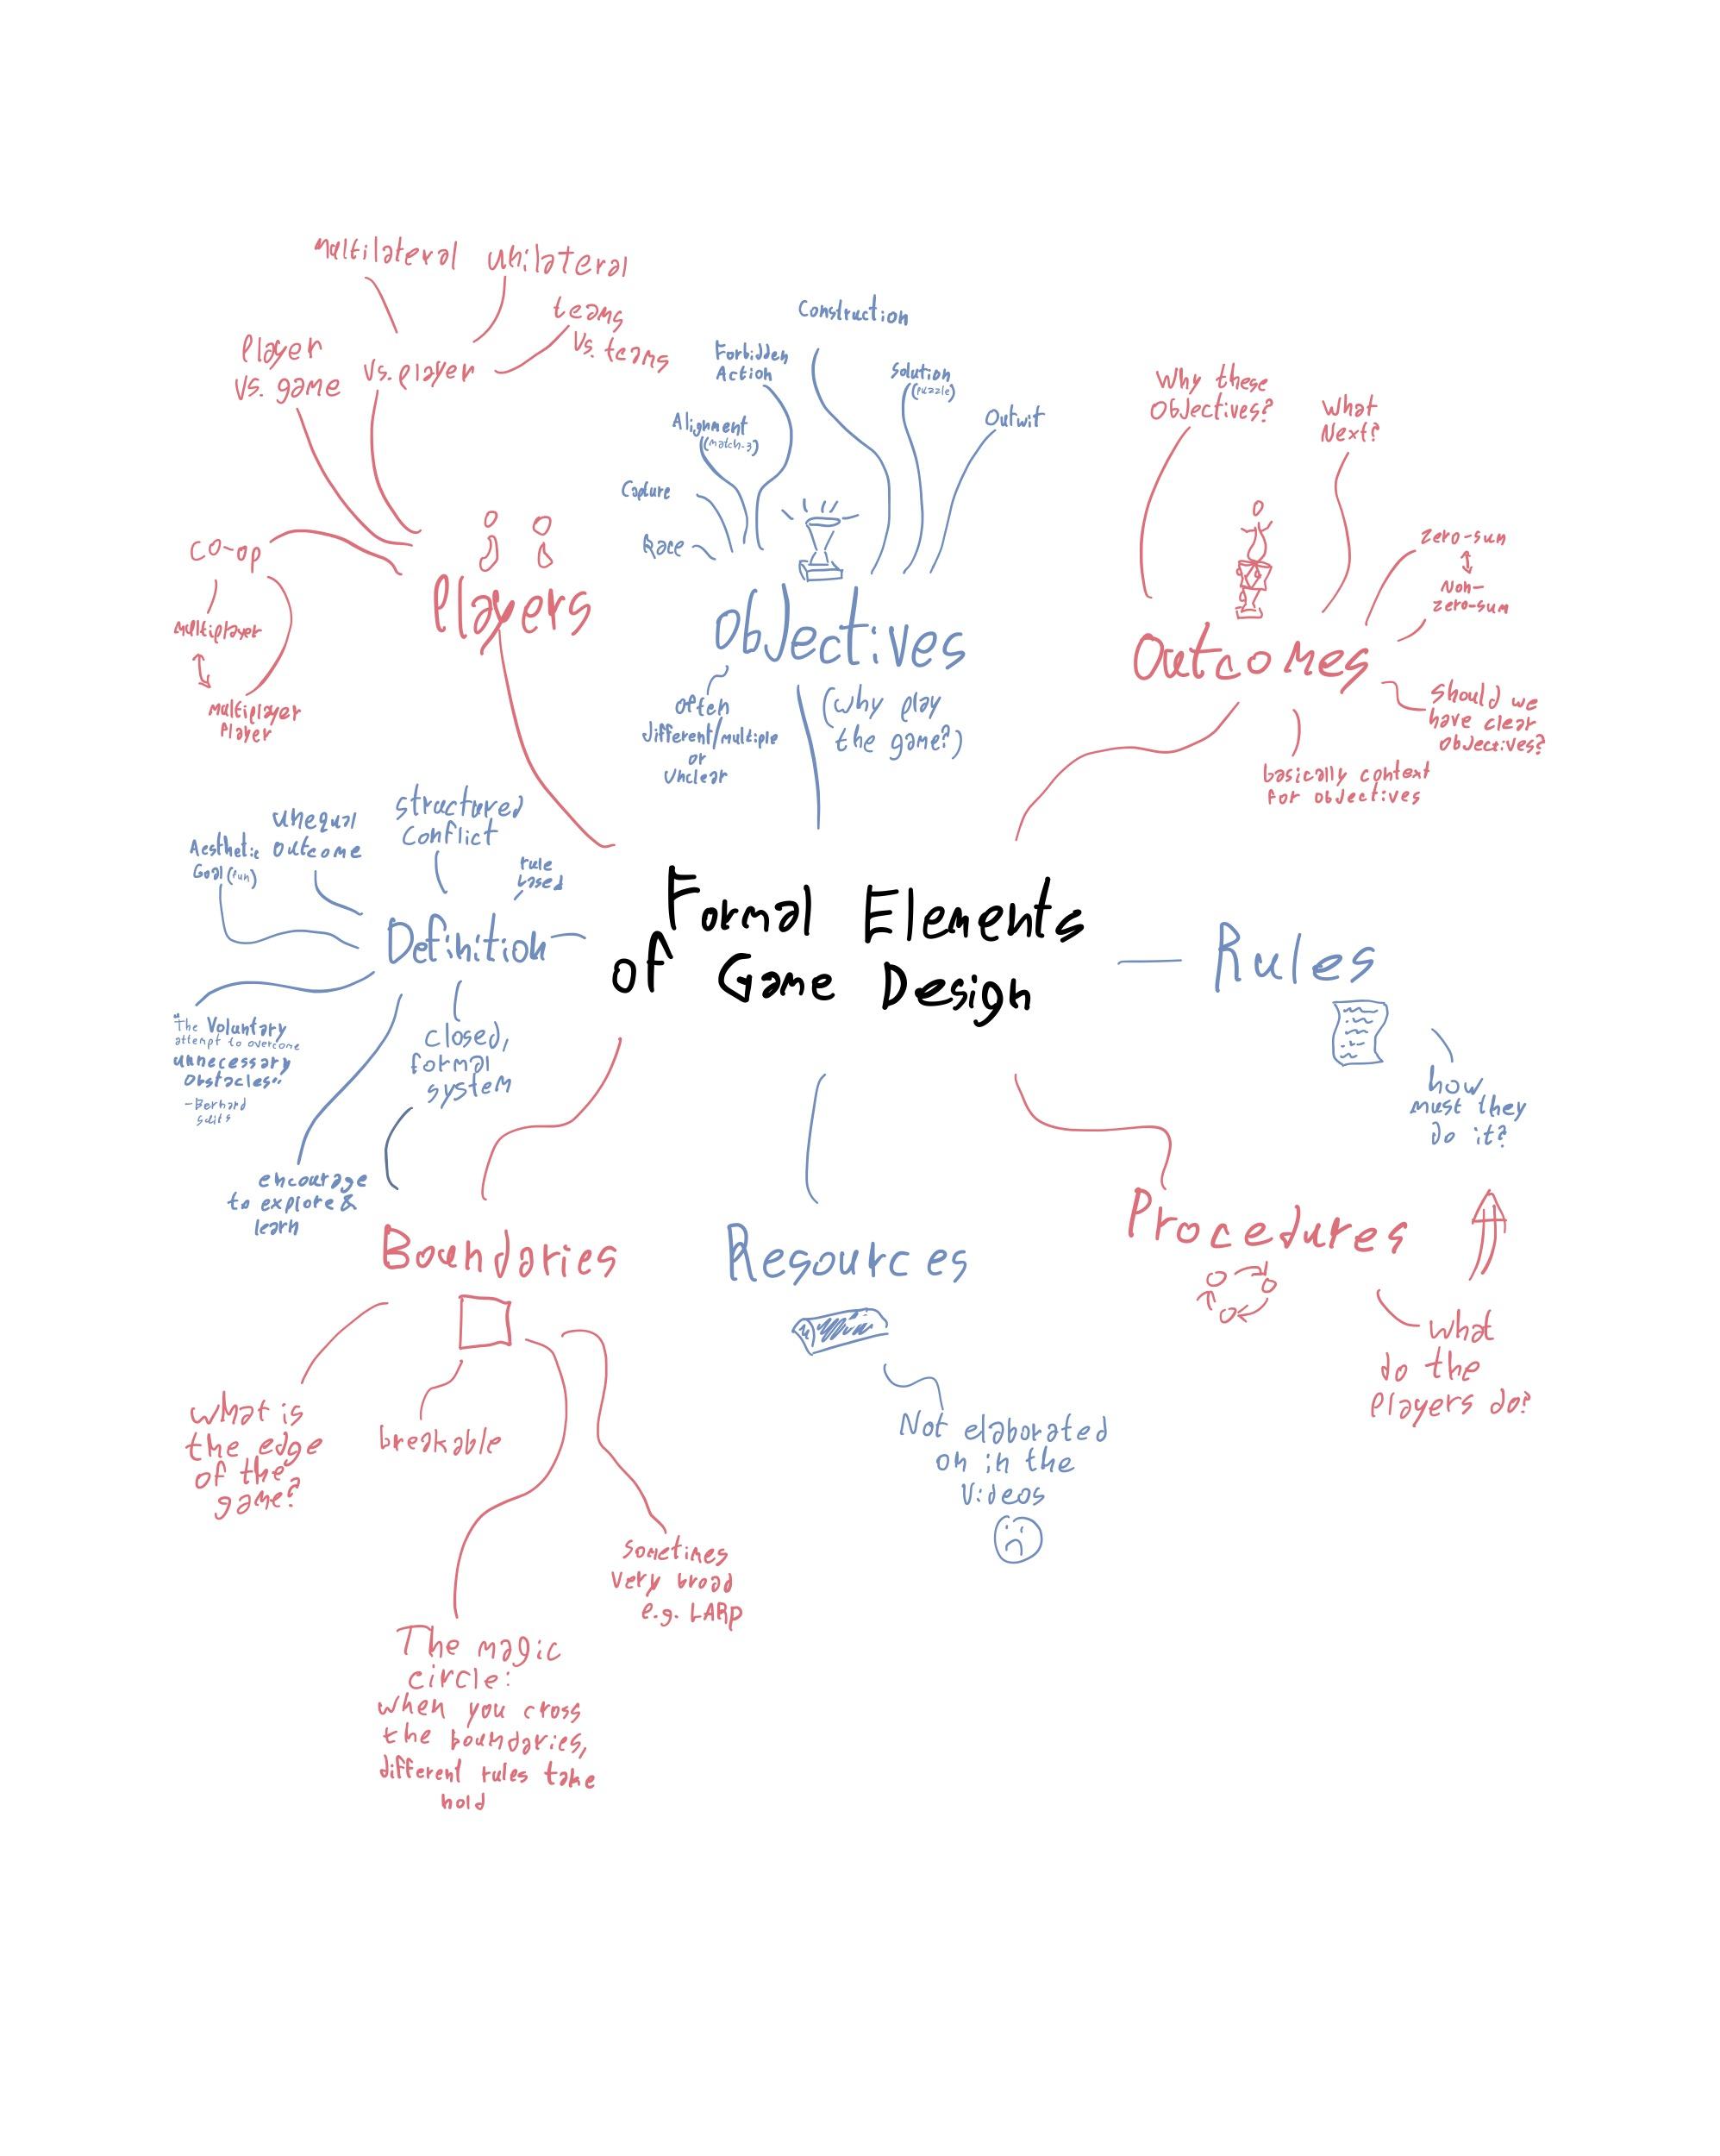 A mind map of the formal elements of game design